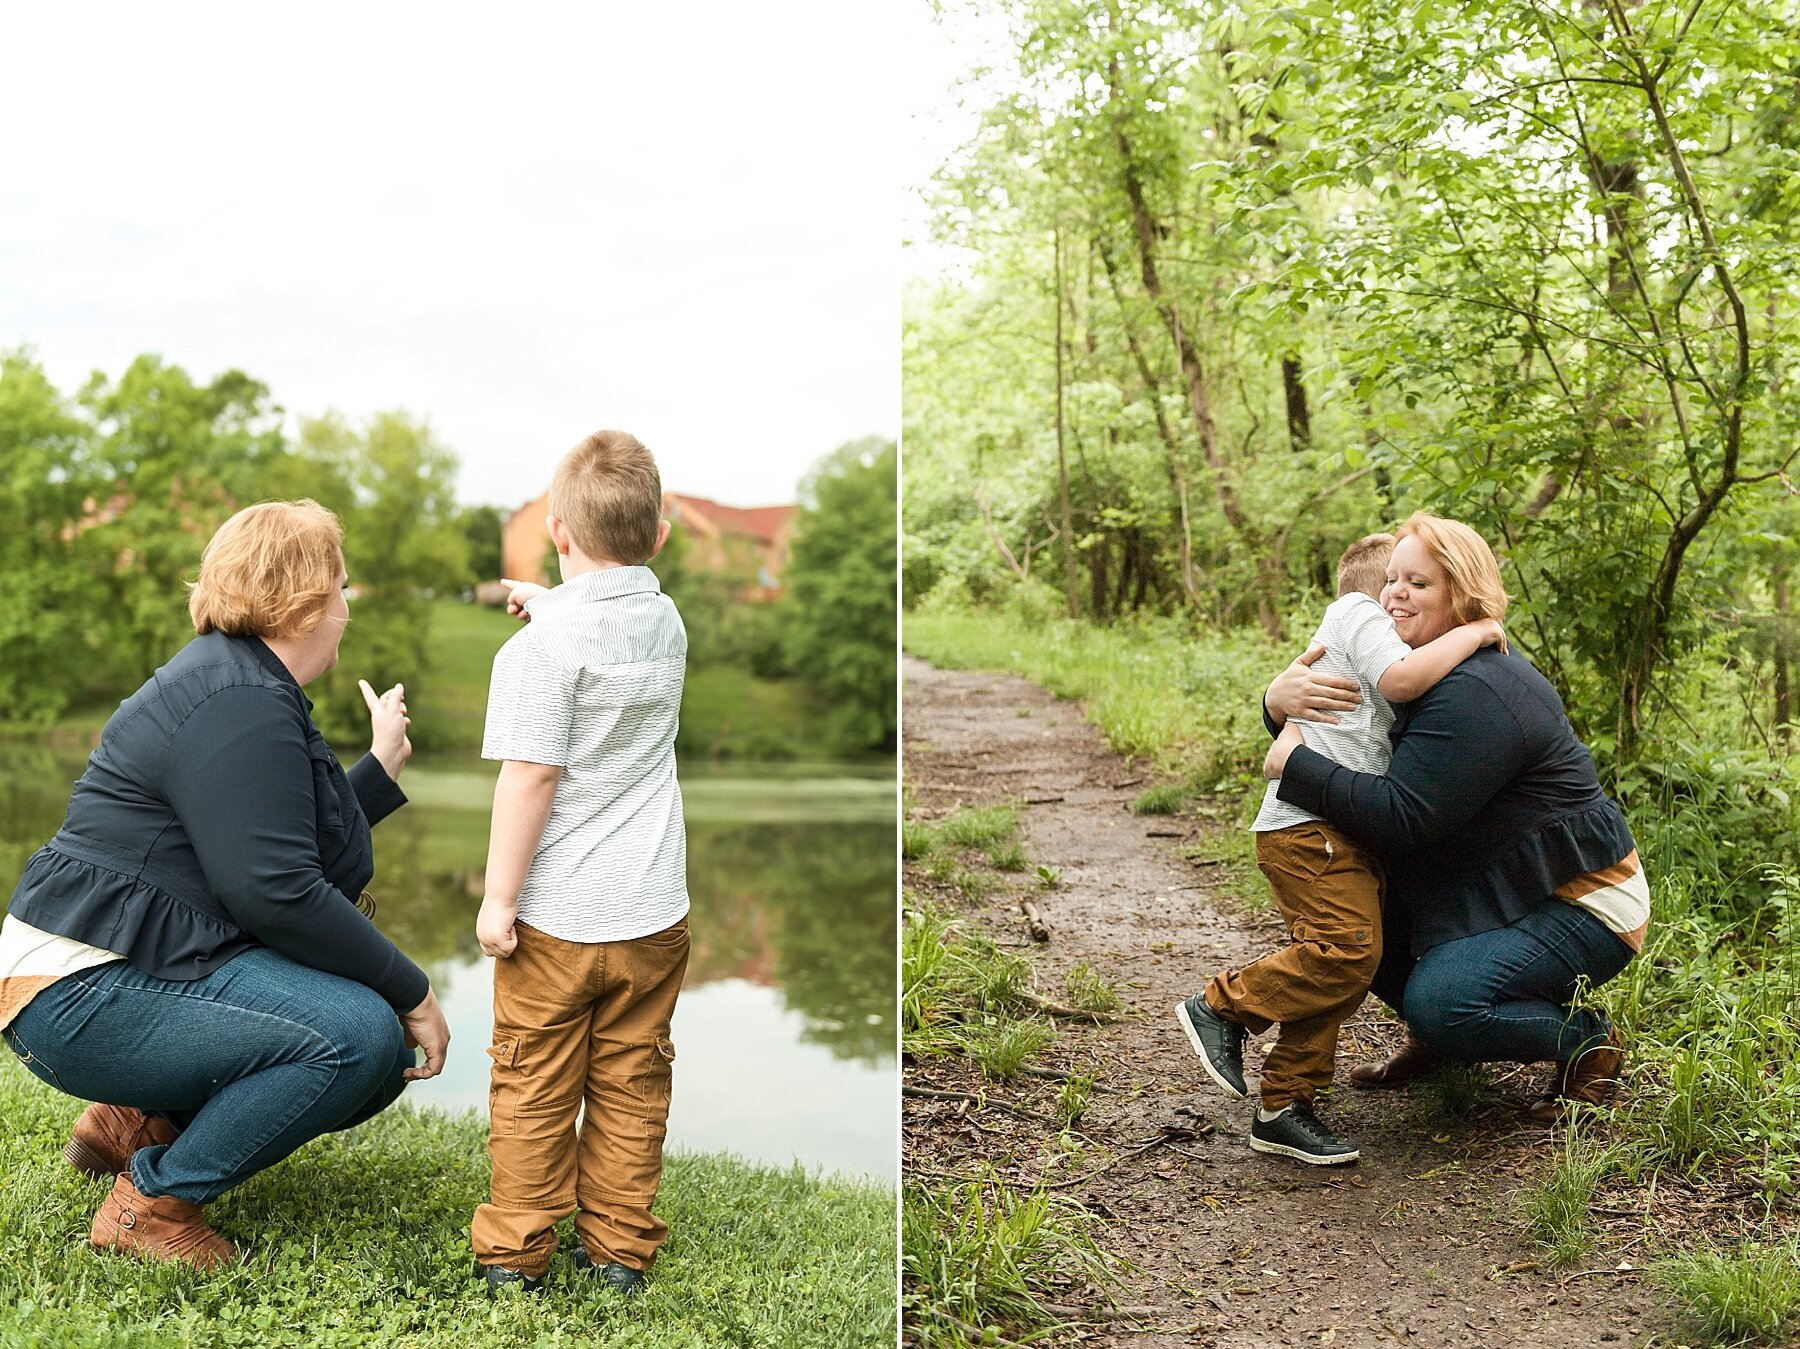 Wendy Zook Photography | Special needs family, family with special needs, P.A.N.D.A.S, P.A.N.S, diagnosis, family photos